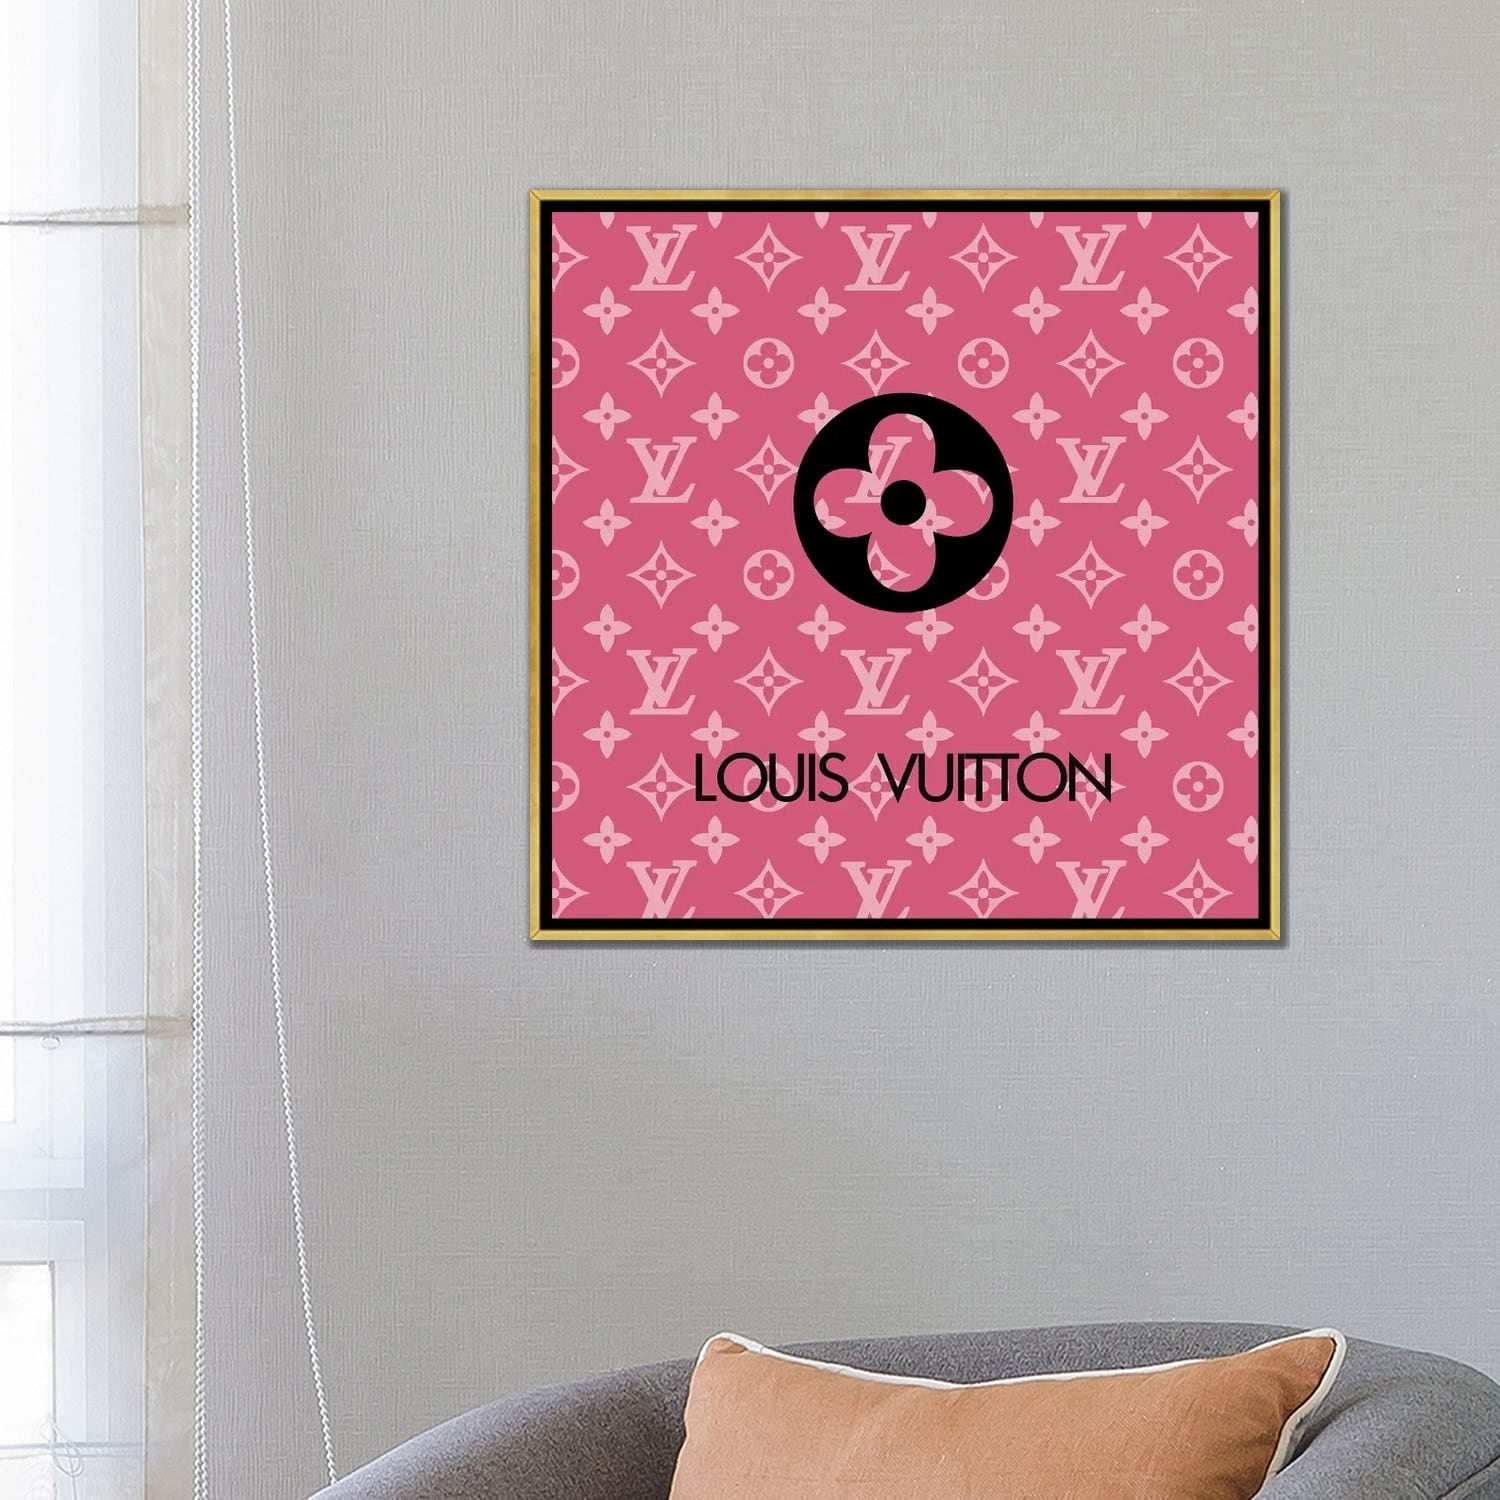 louis vuitton curtains for living room